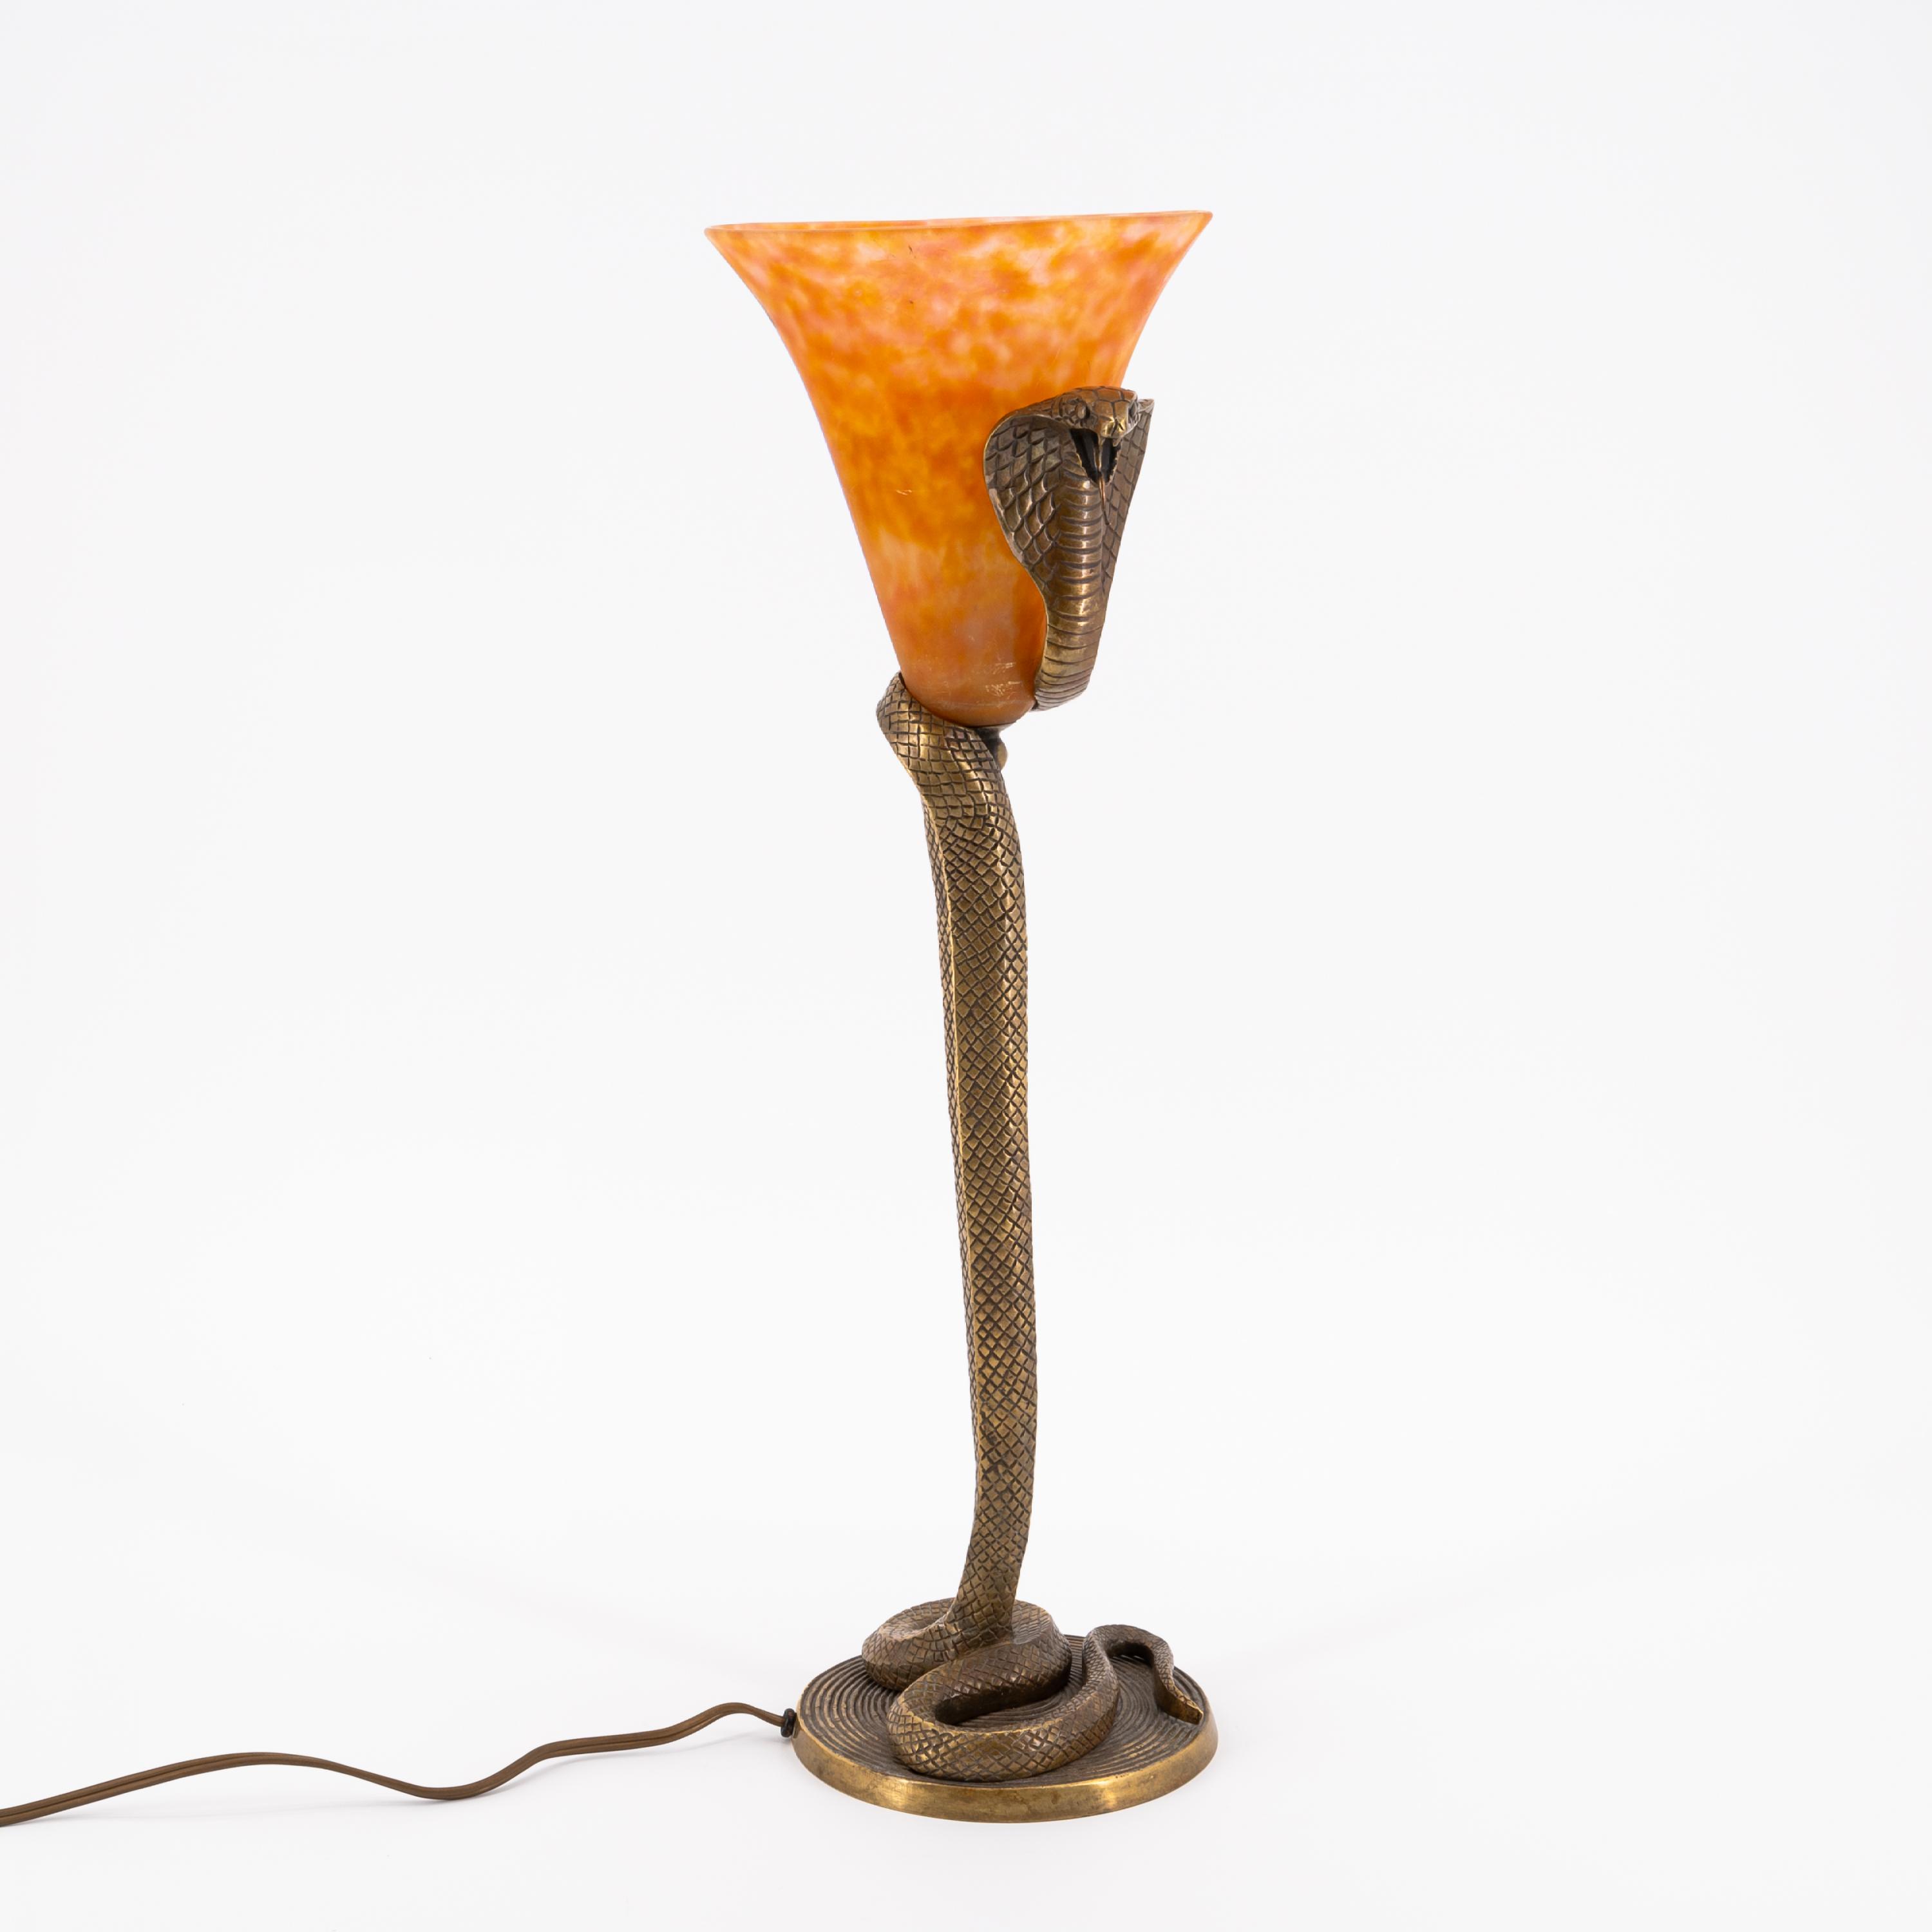 GLASS TABLE LAMP 'SERPENT' WITH COBRA SNAKE - Image 5 of 7